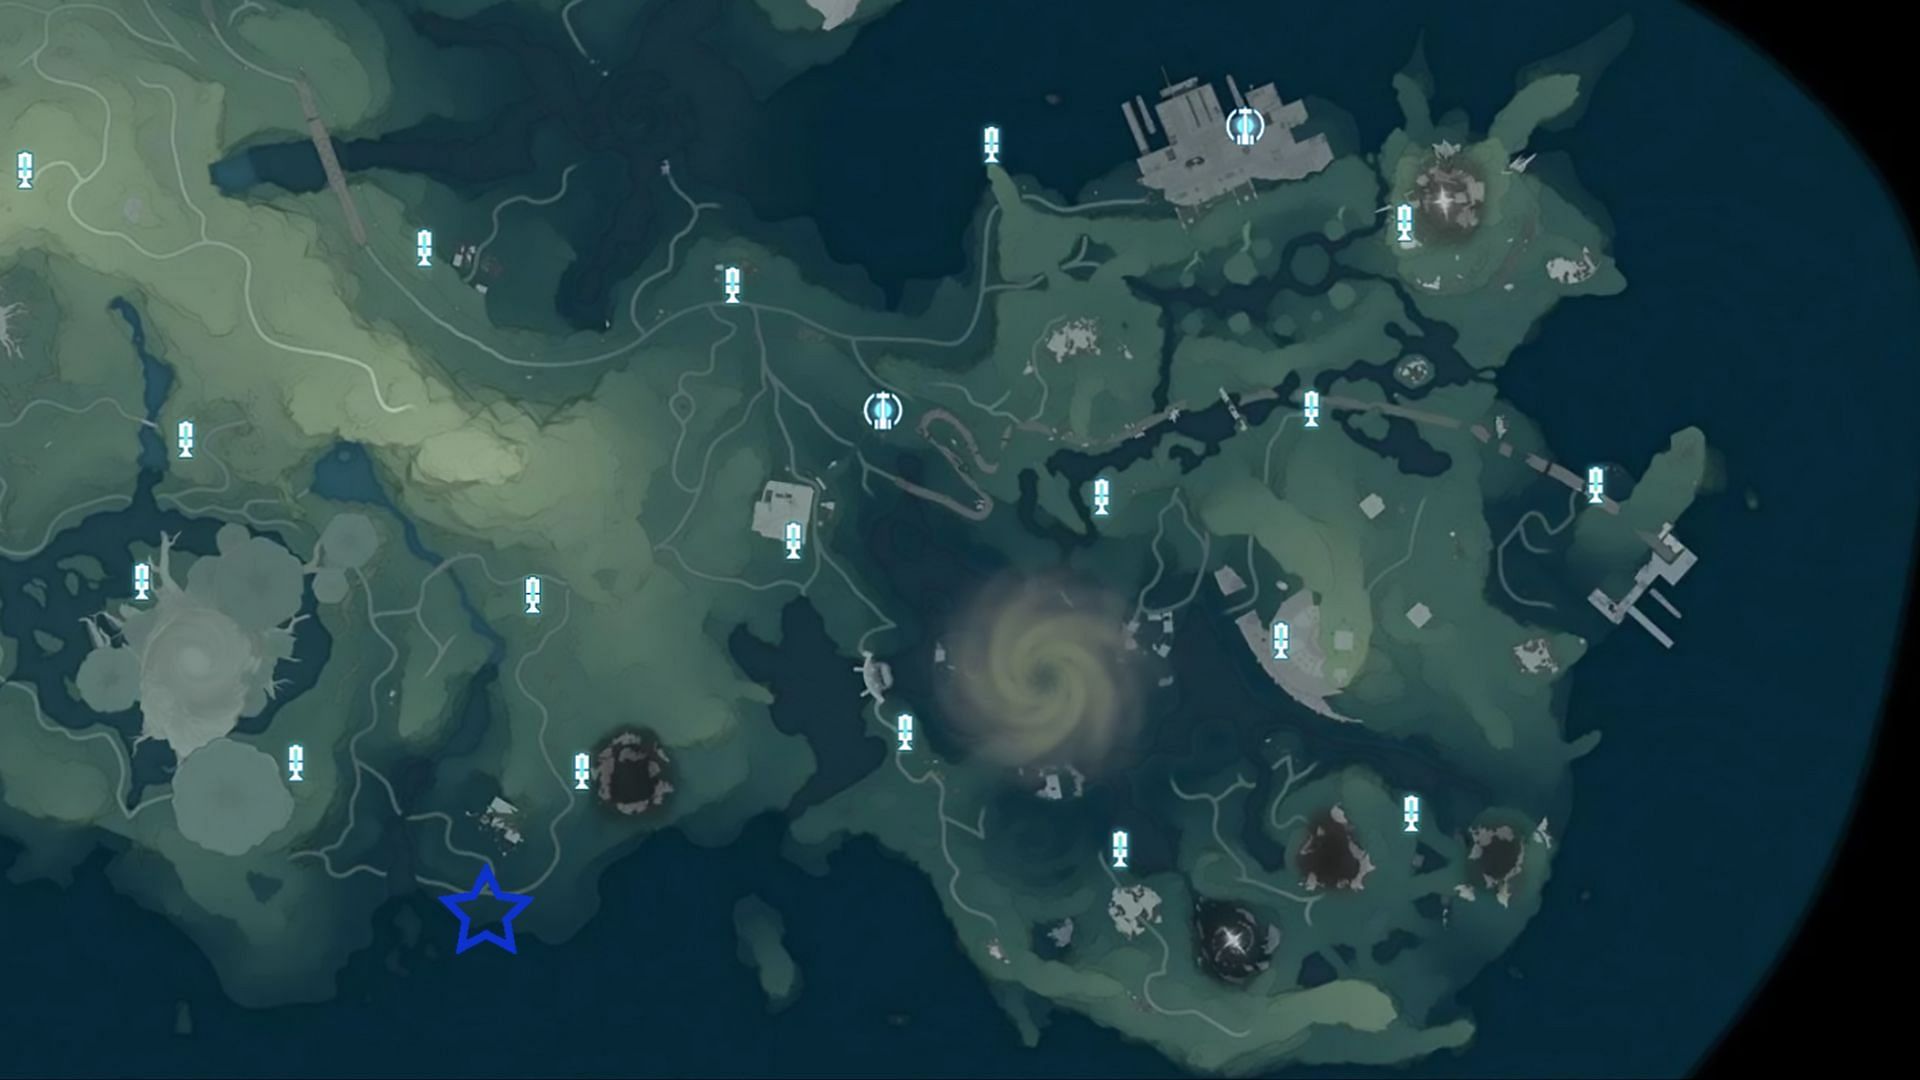 Rocksteady Guardians location 3 (Image via appsample interactive map)